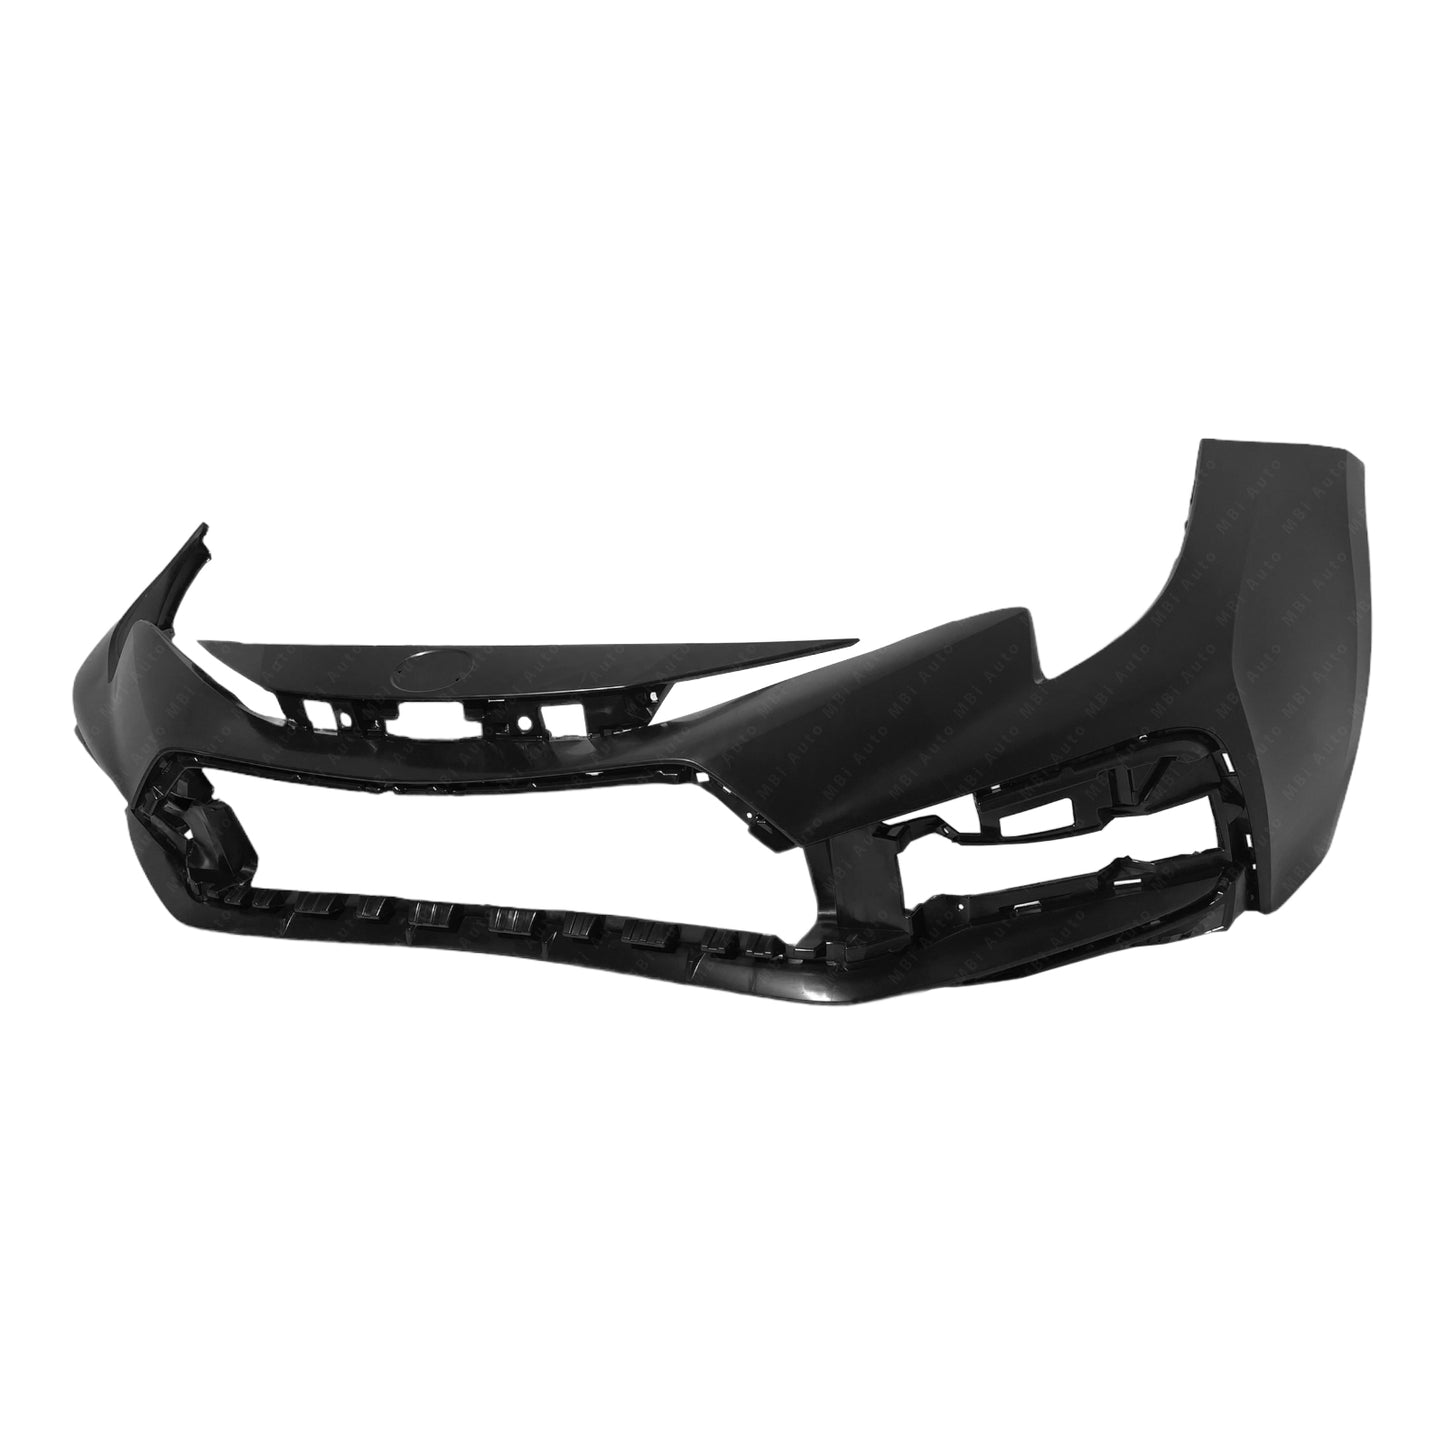 Toyota Corolla 2020 - 2024 Front Bumper Cover 20 - 24 TO1000460 Bumper-King